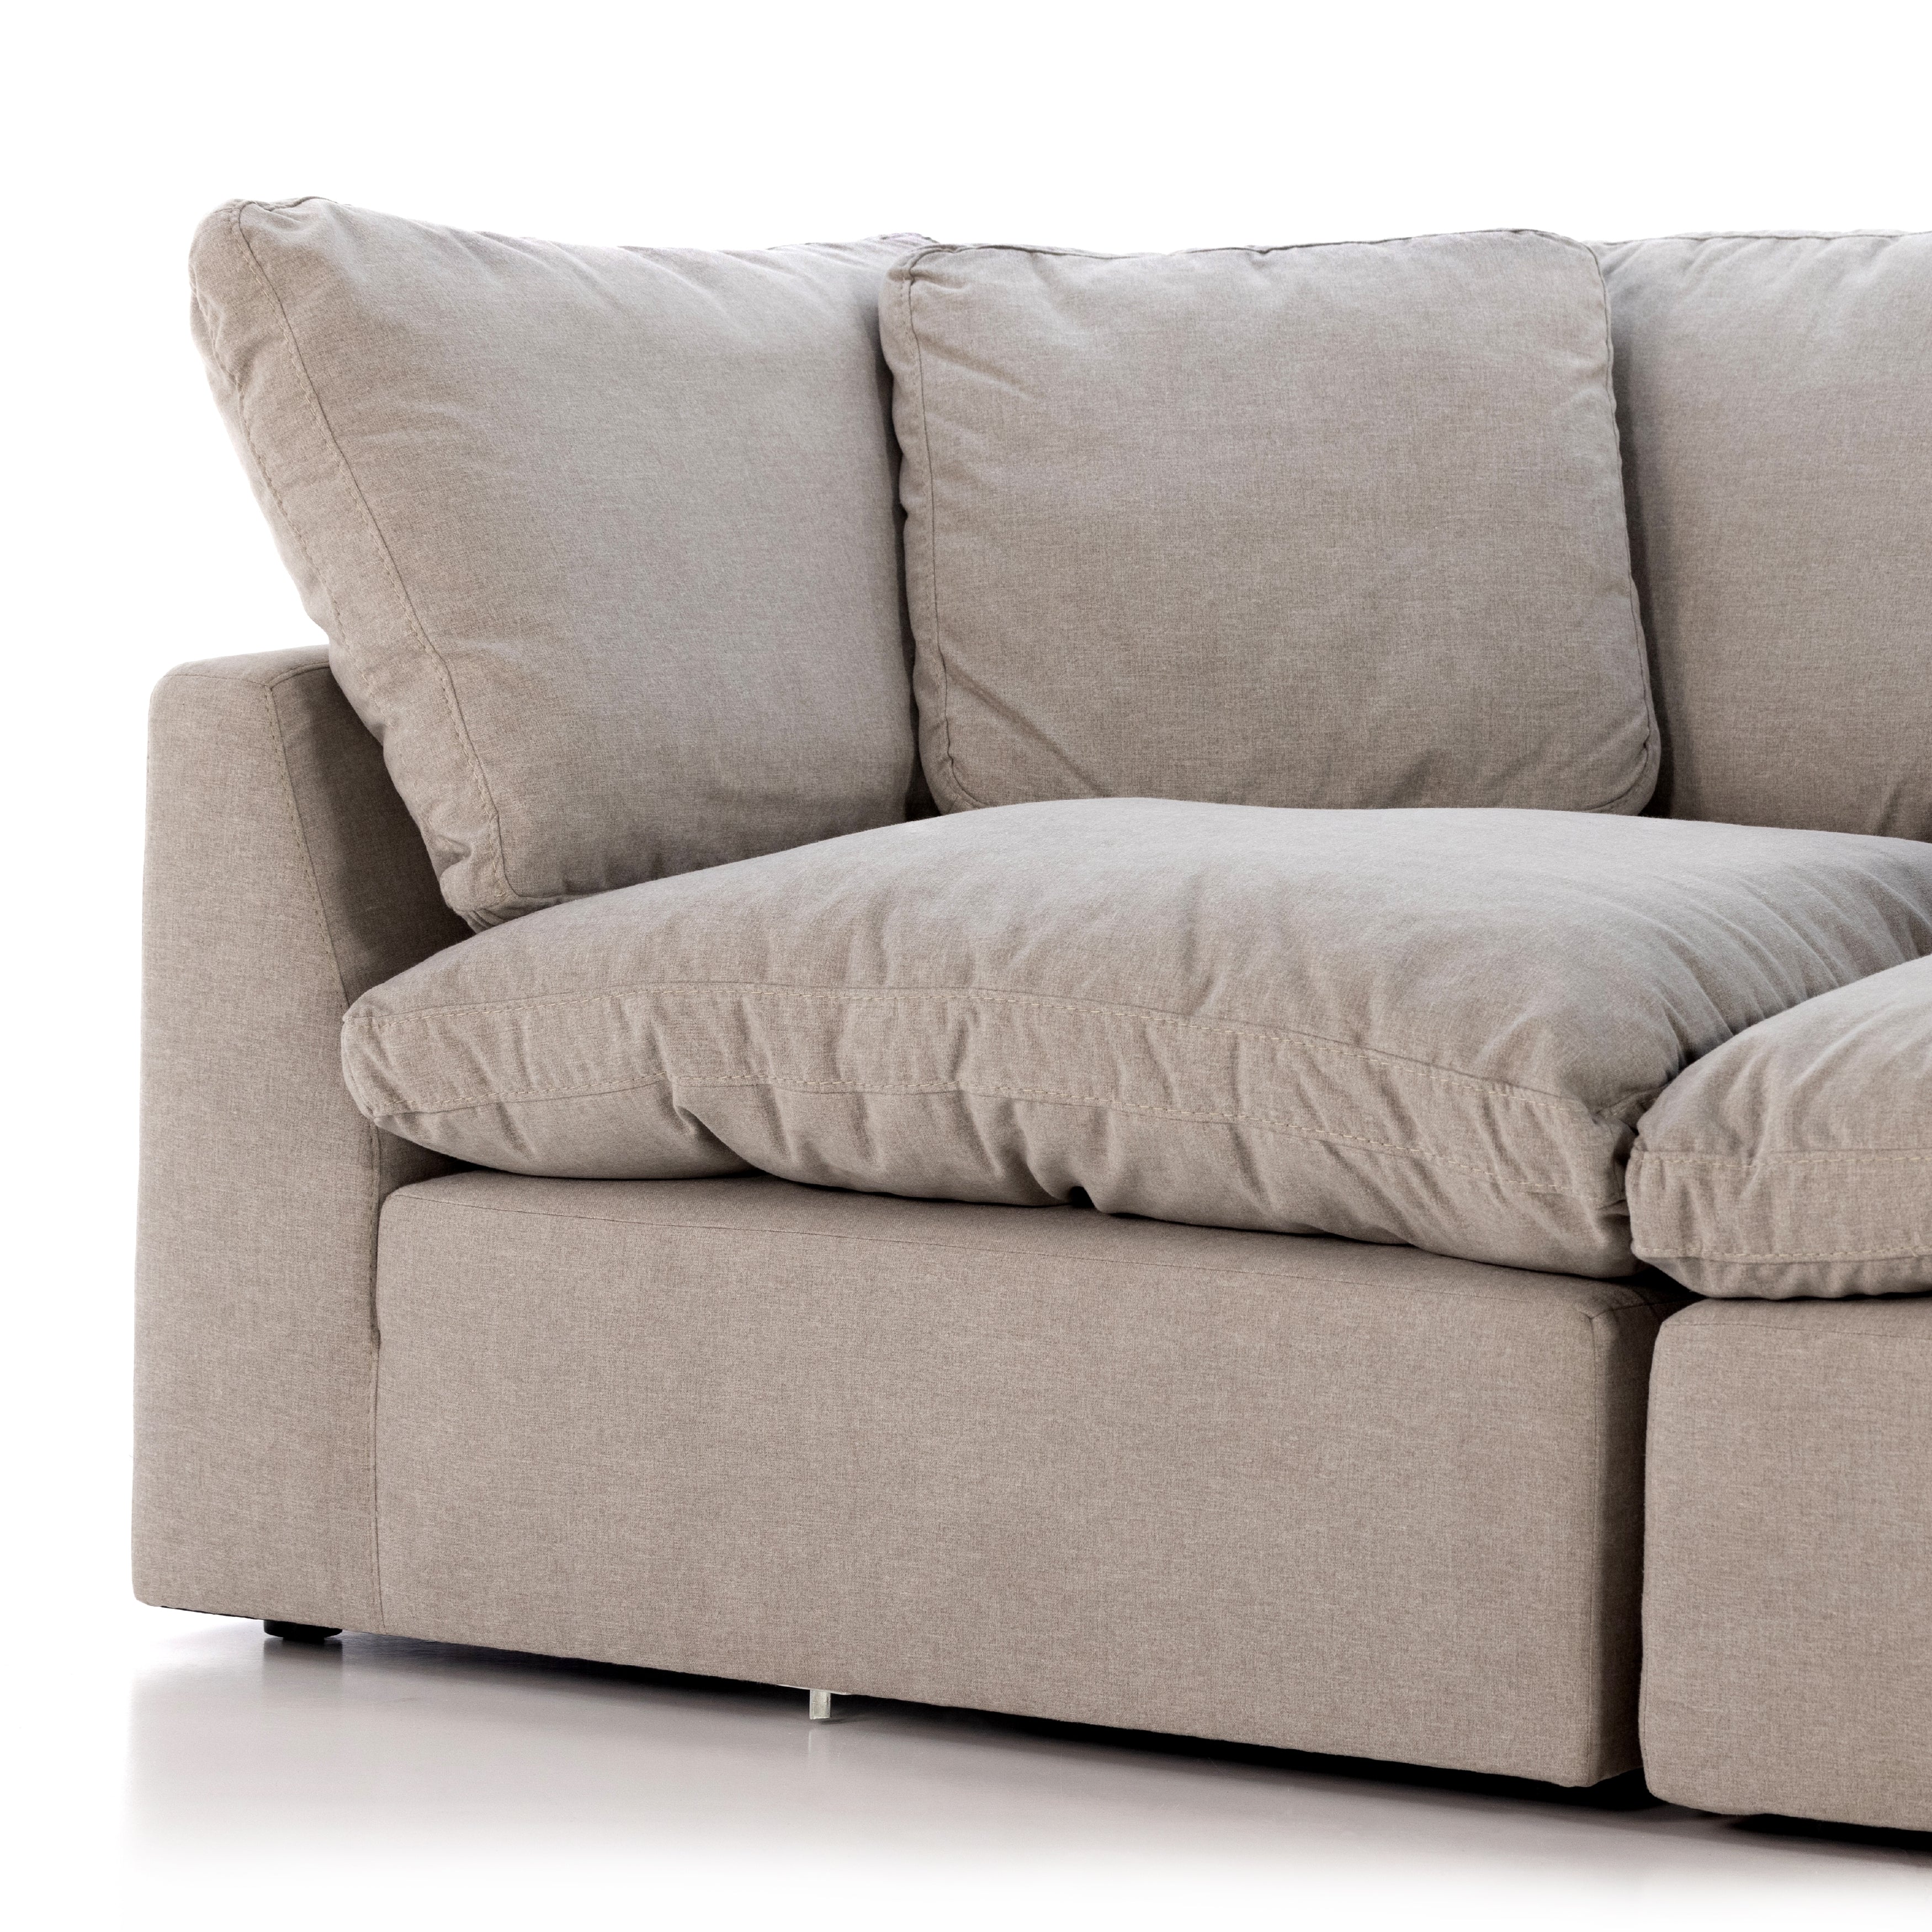 Stevie 2-pc Sectional